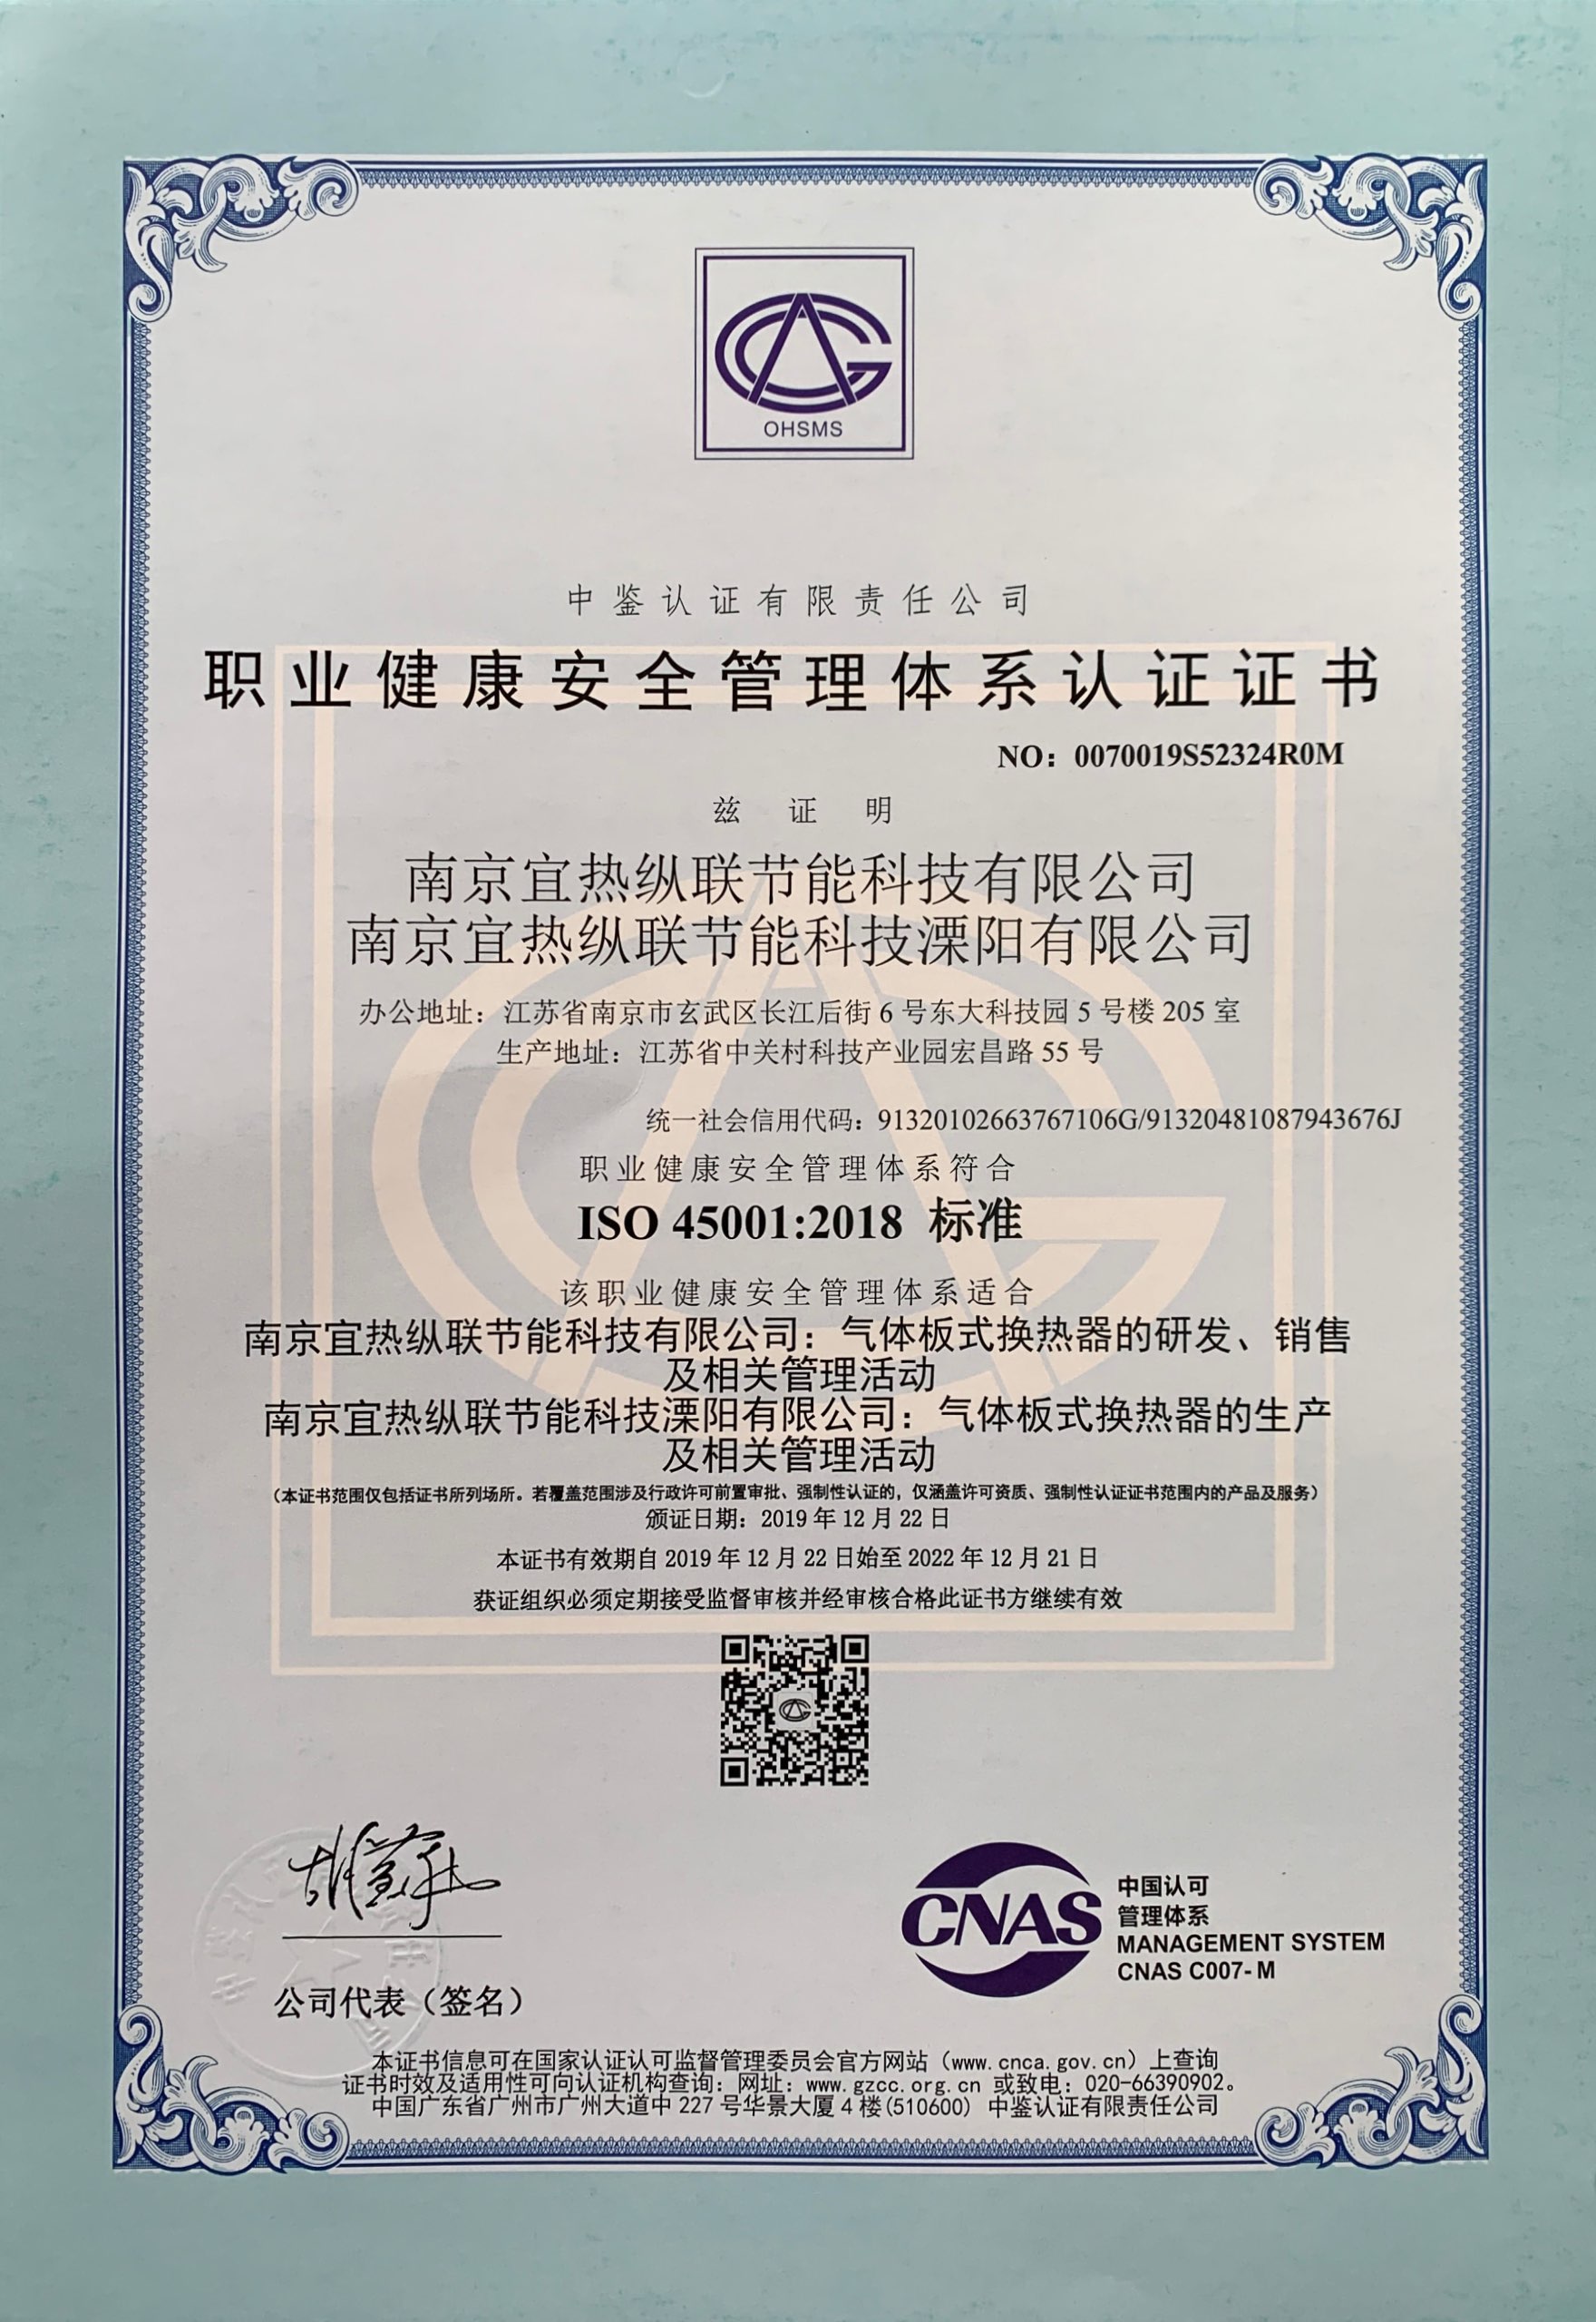 ISO45001:2018 Chinese Certificate